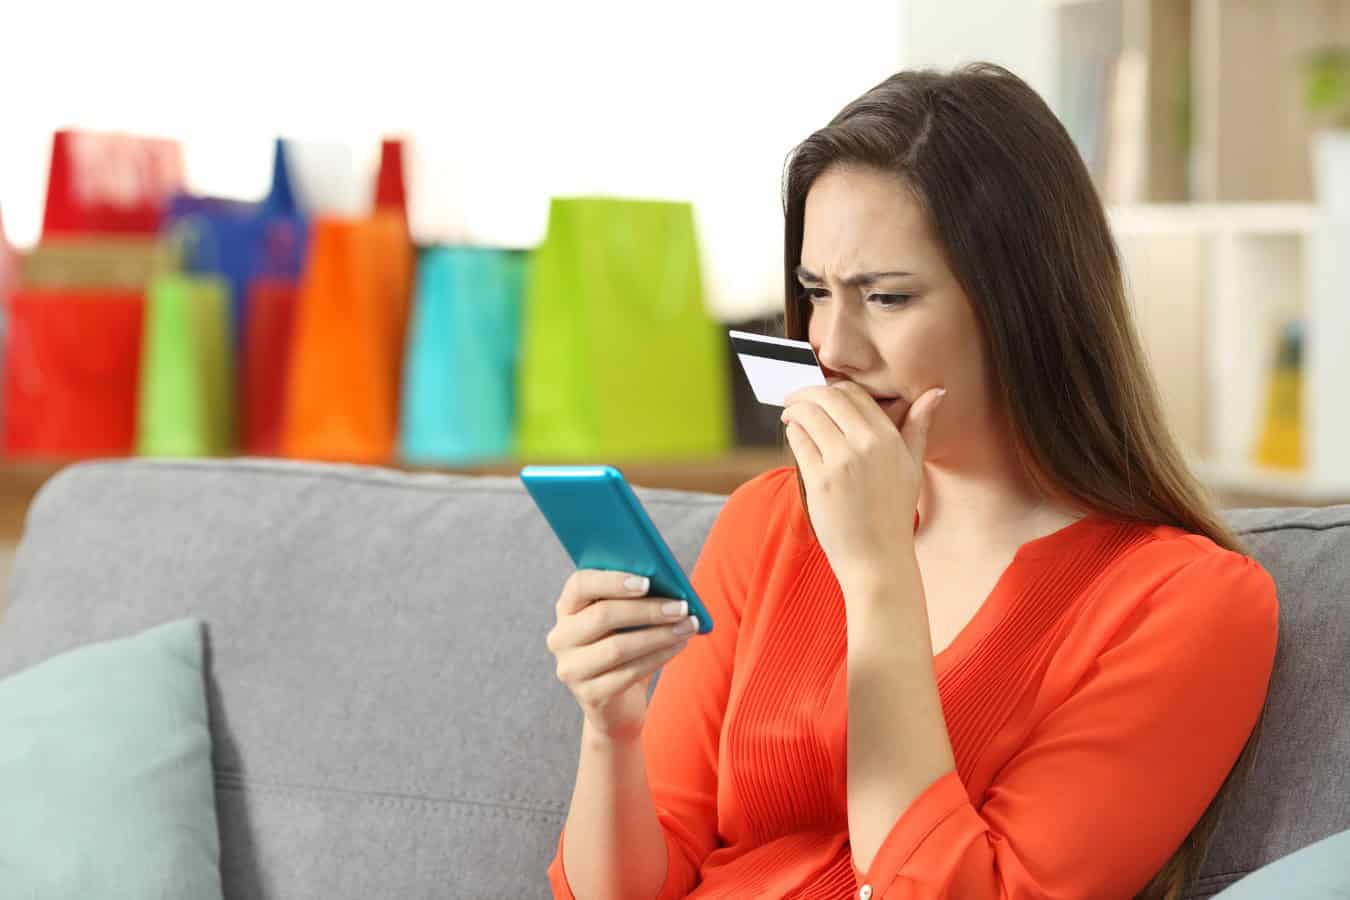 Worried lady buying online with credit card and phone sitting on a couch